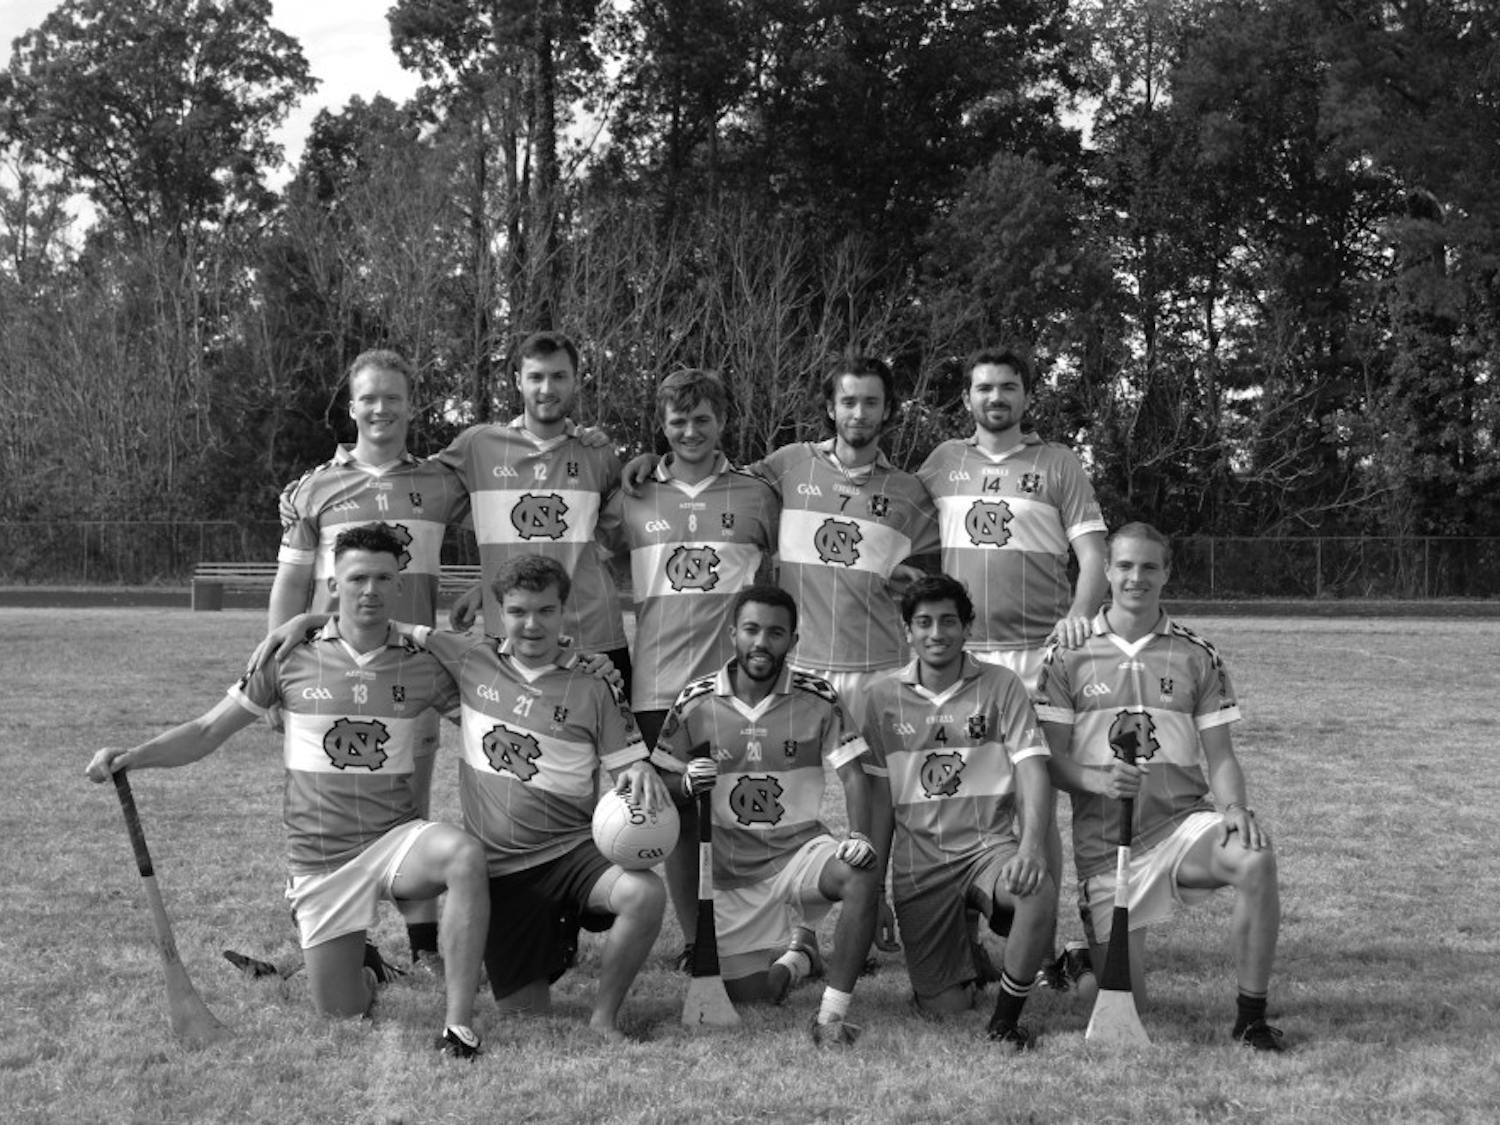 UNC Irish Sport's hurling club after a scrimmage. Contributed by Alton Gayton.